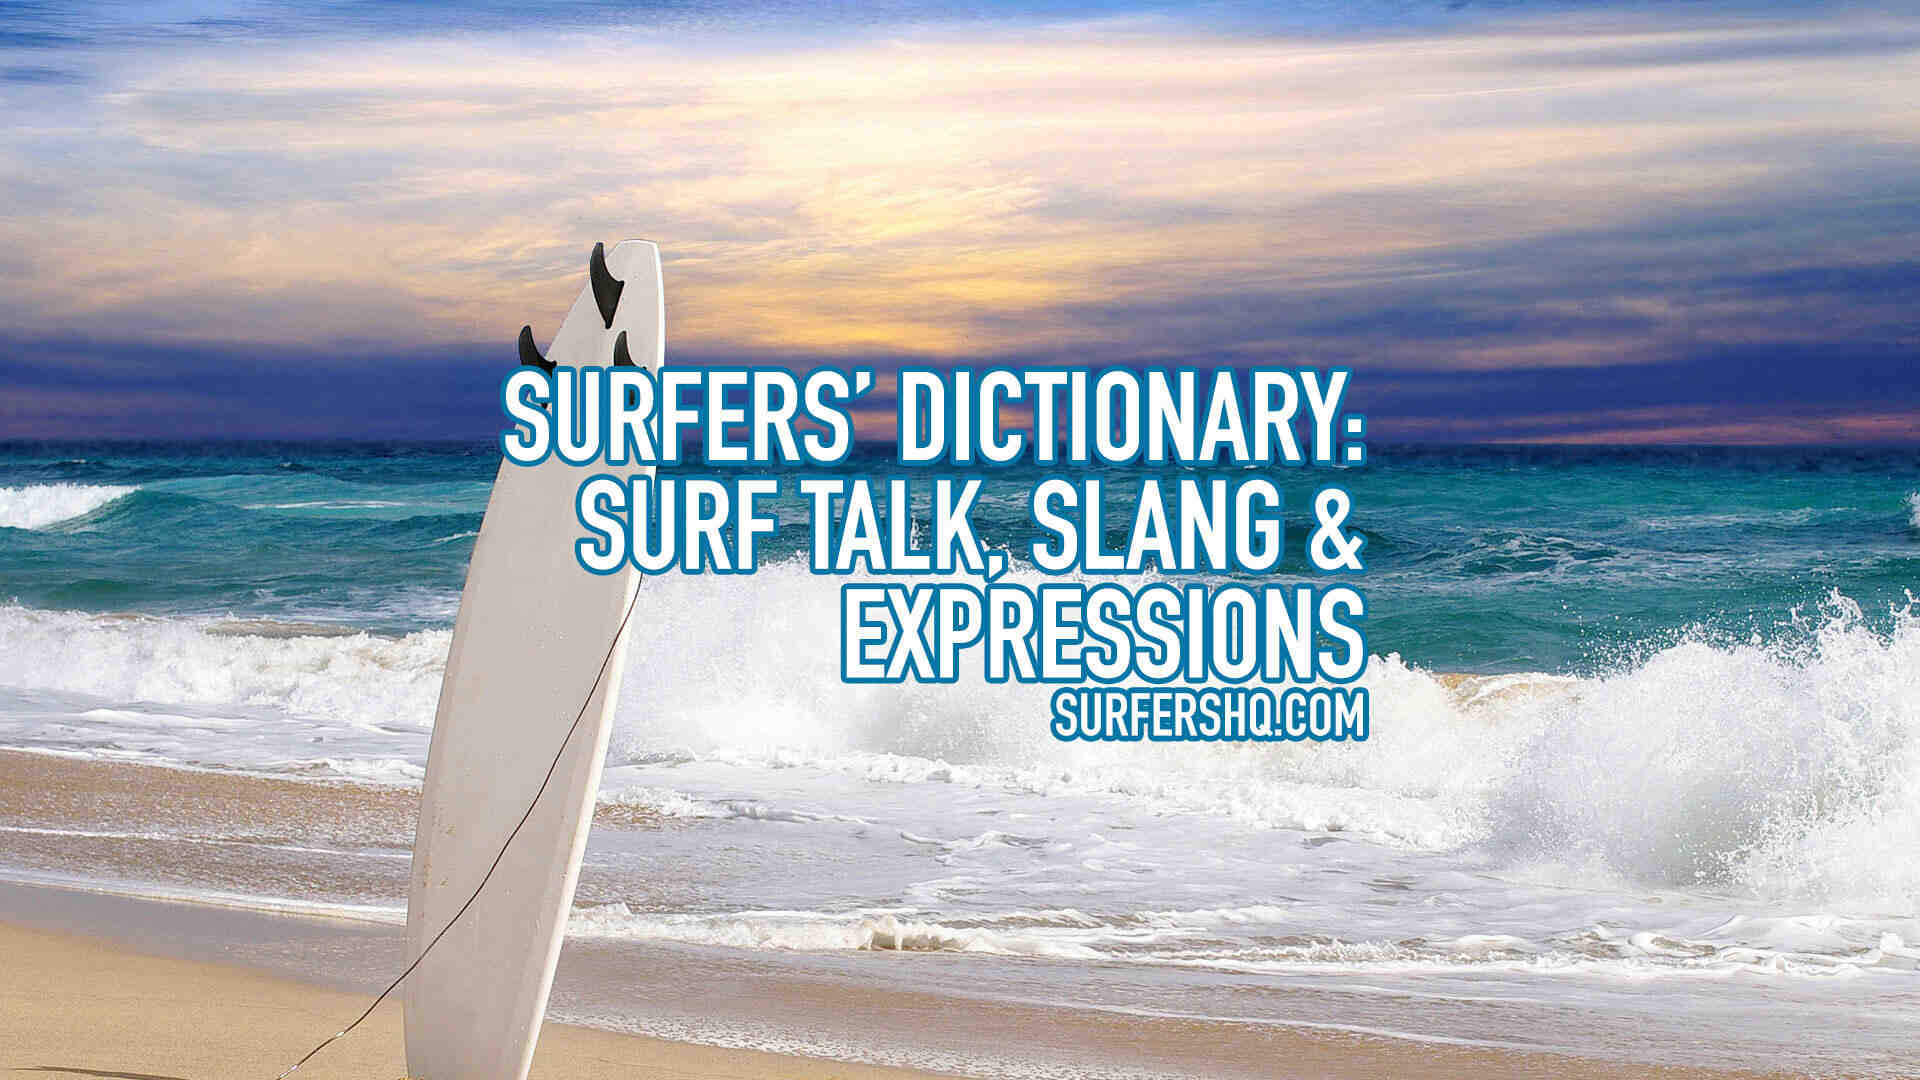 What do surfers call their boards?